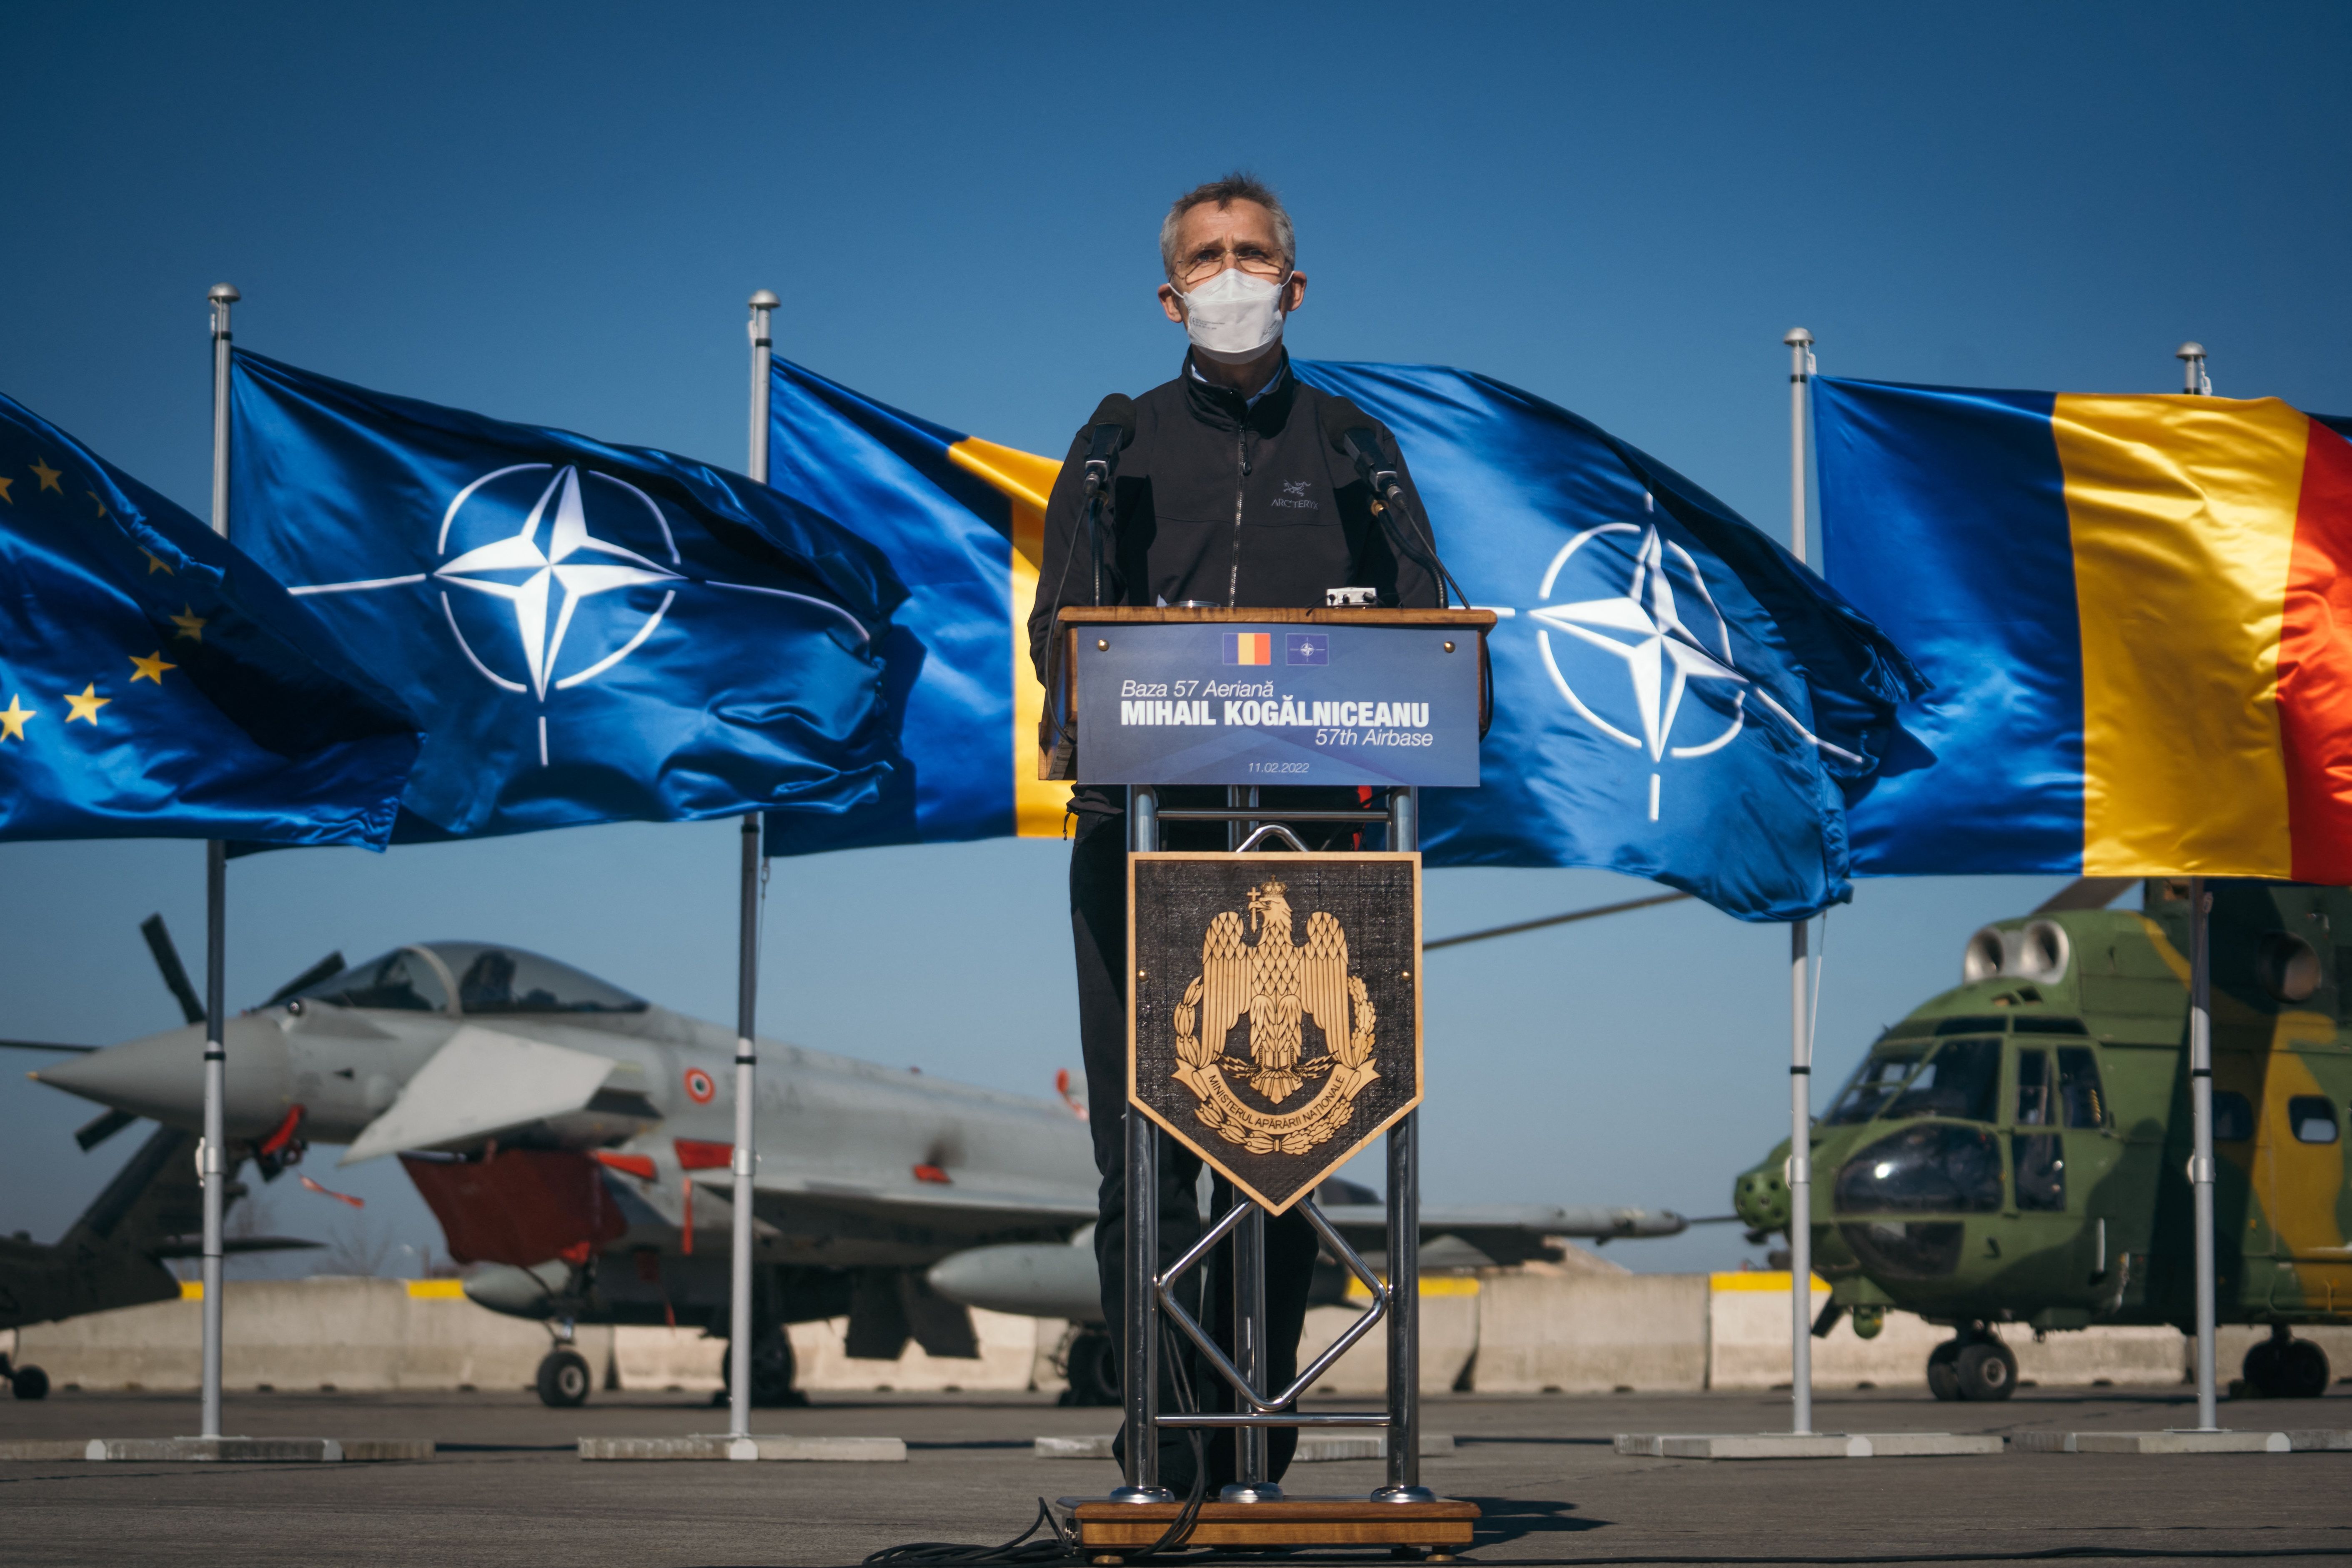 NATO Secretary General Jens Stoltenberg speaks during a visit at Mihail Kogalniceanu Military Base on February 11, in Mihail Kogalniceanu, Romania.